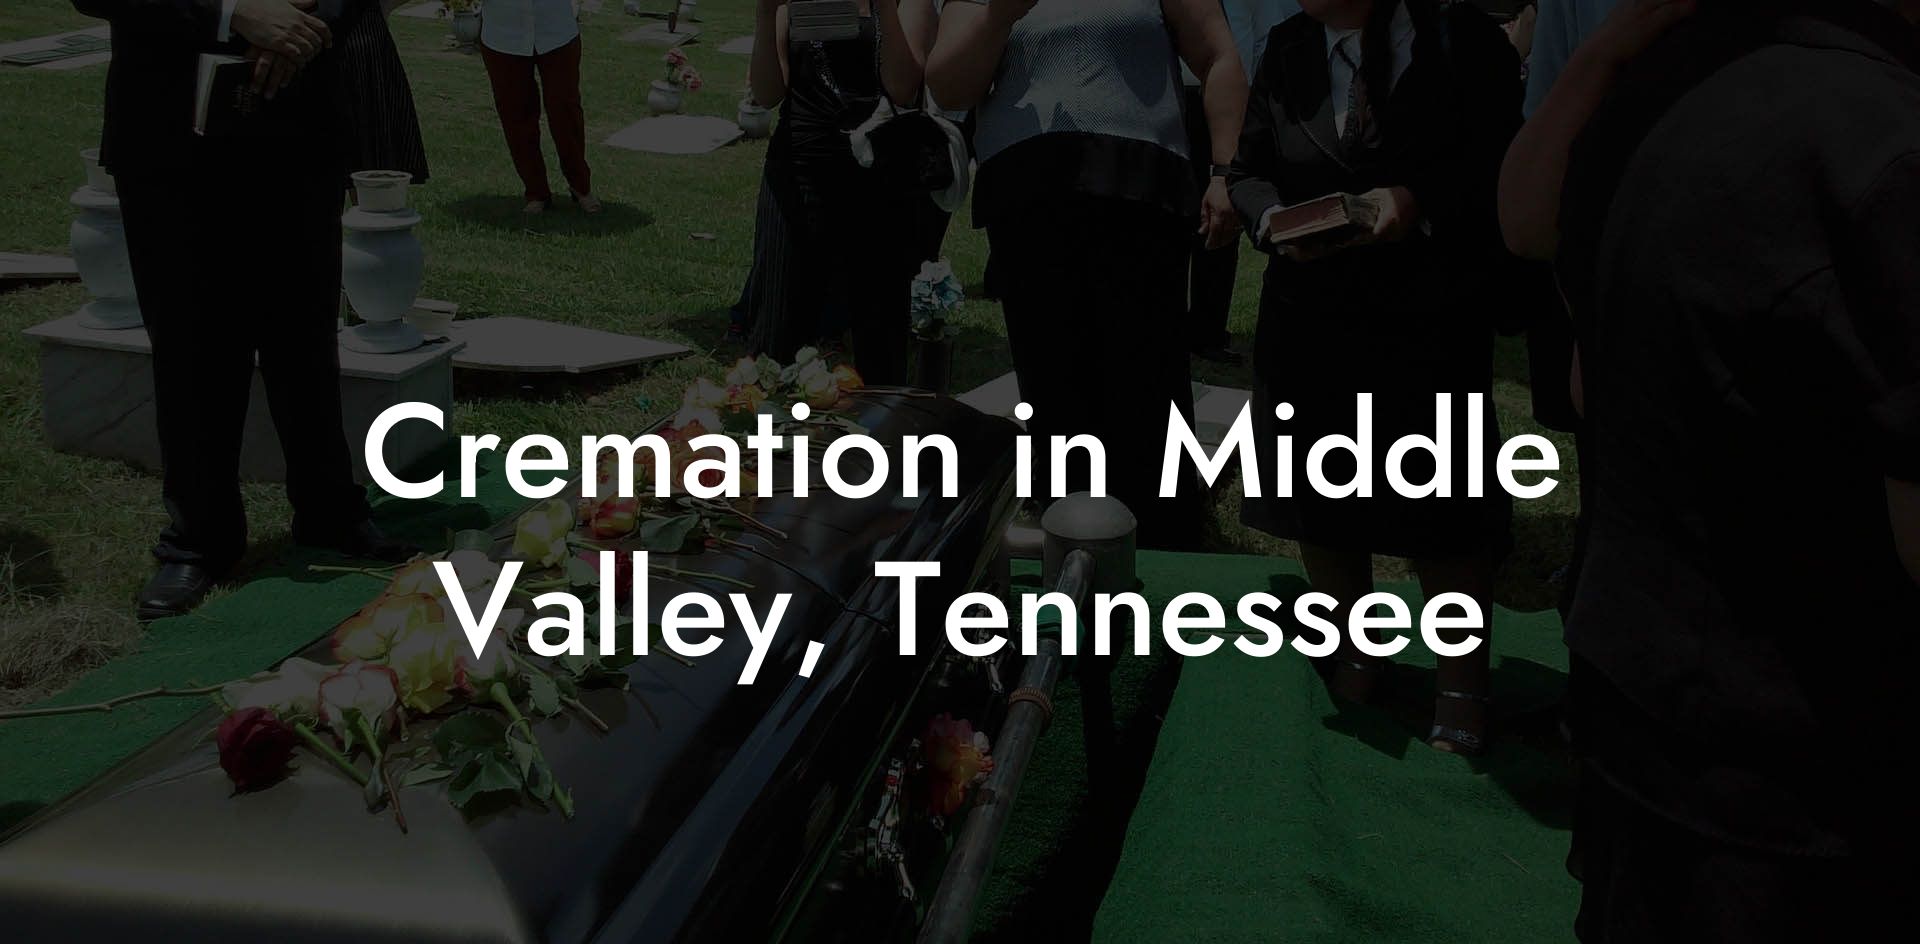 Cremation in Middle Valley, Tennessee